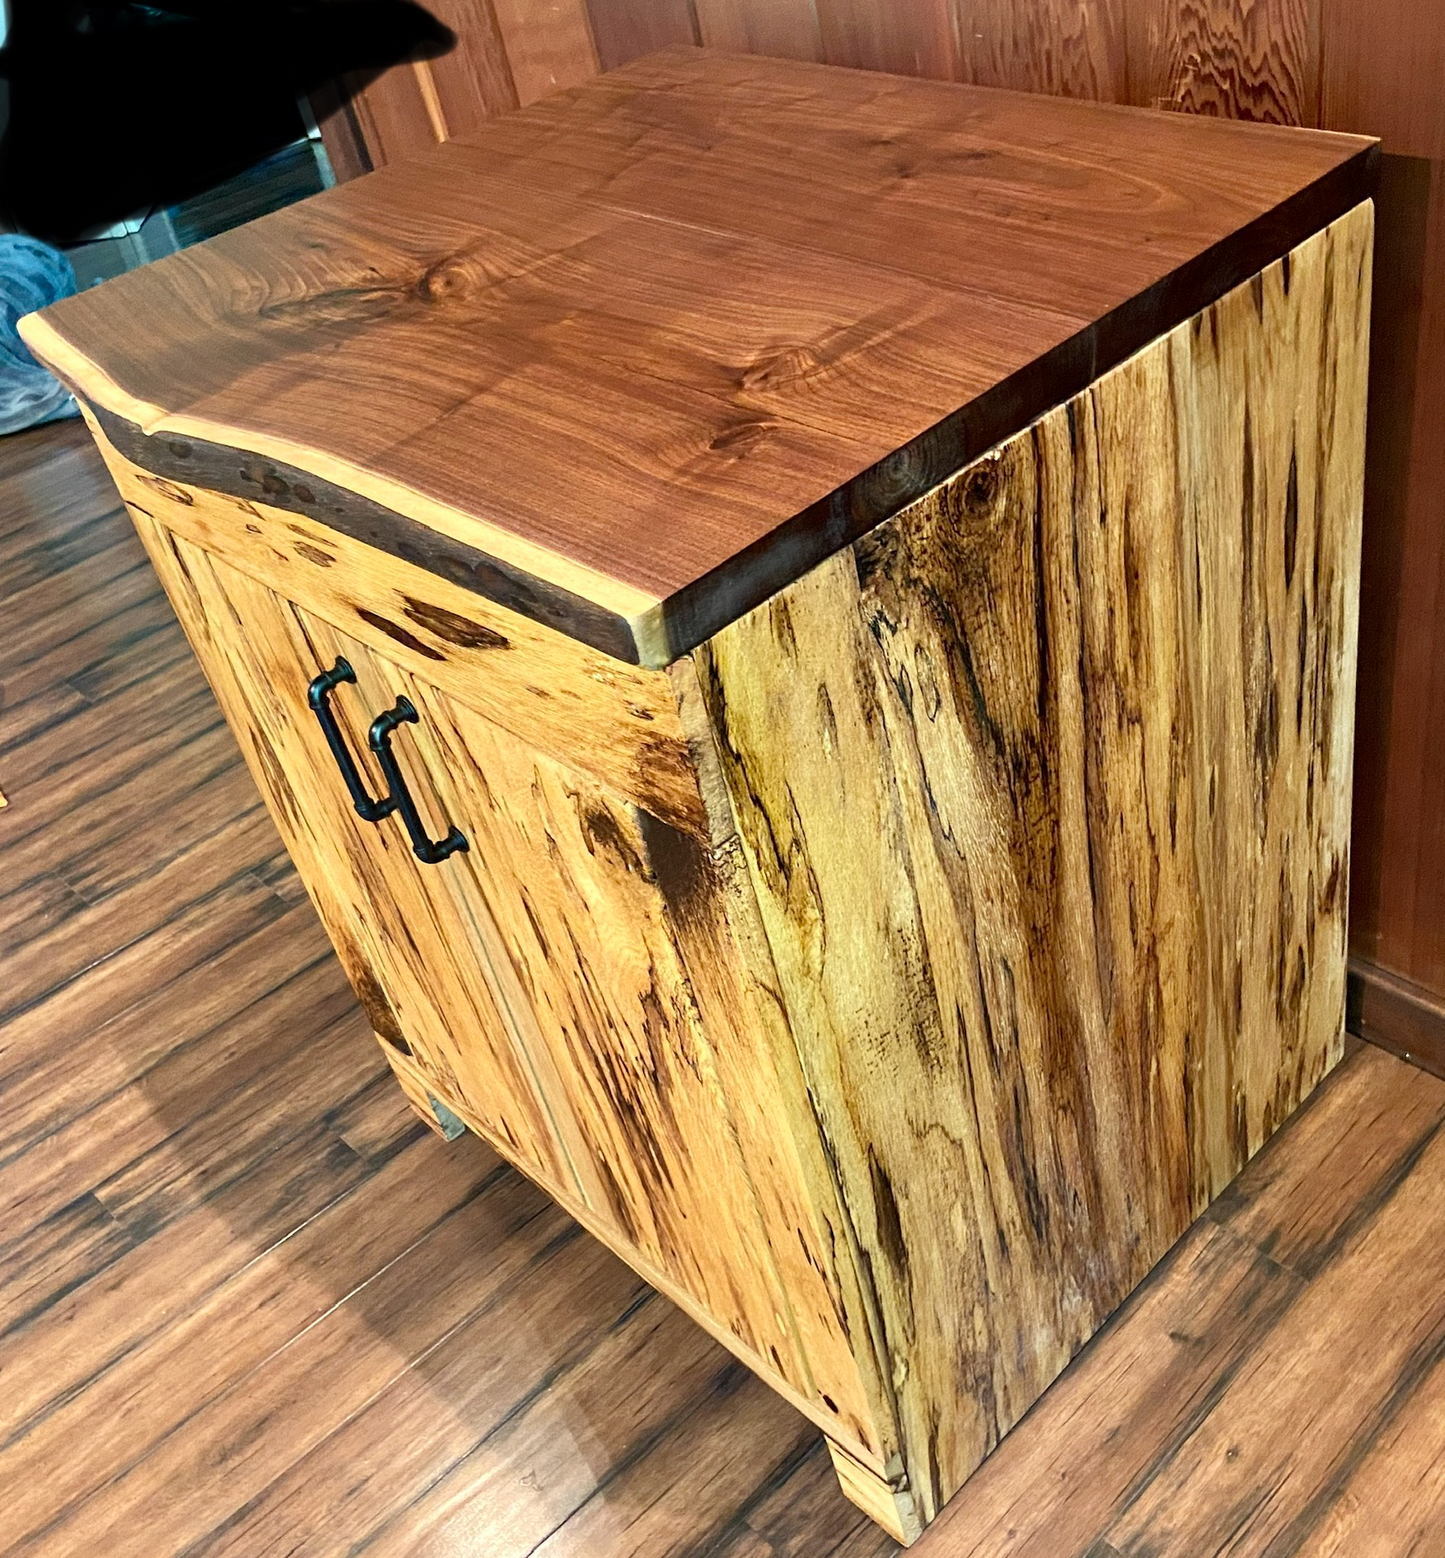 Spalted White Oak Vanity with Live Edge Walnut Top